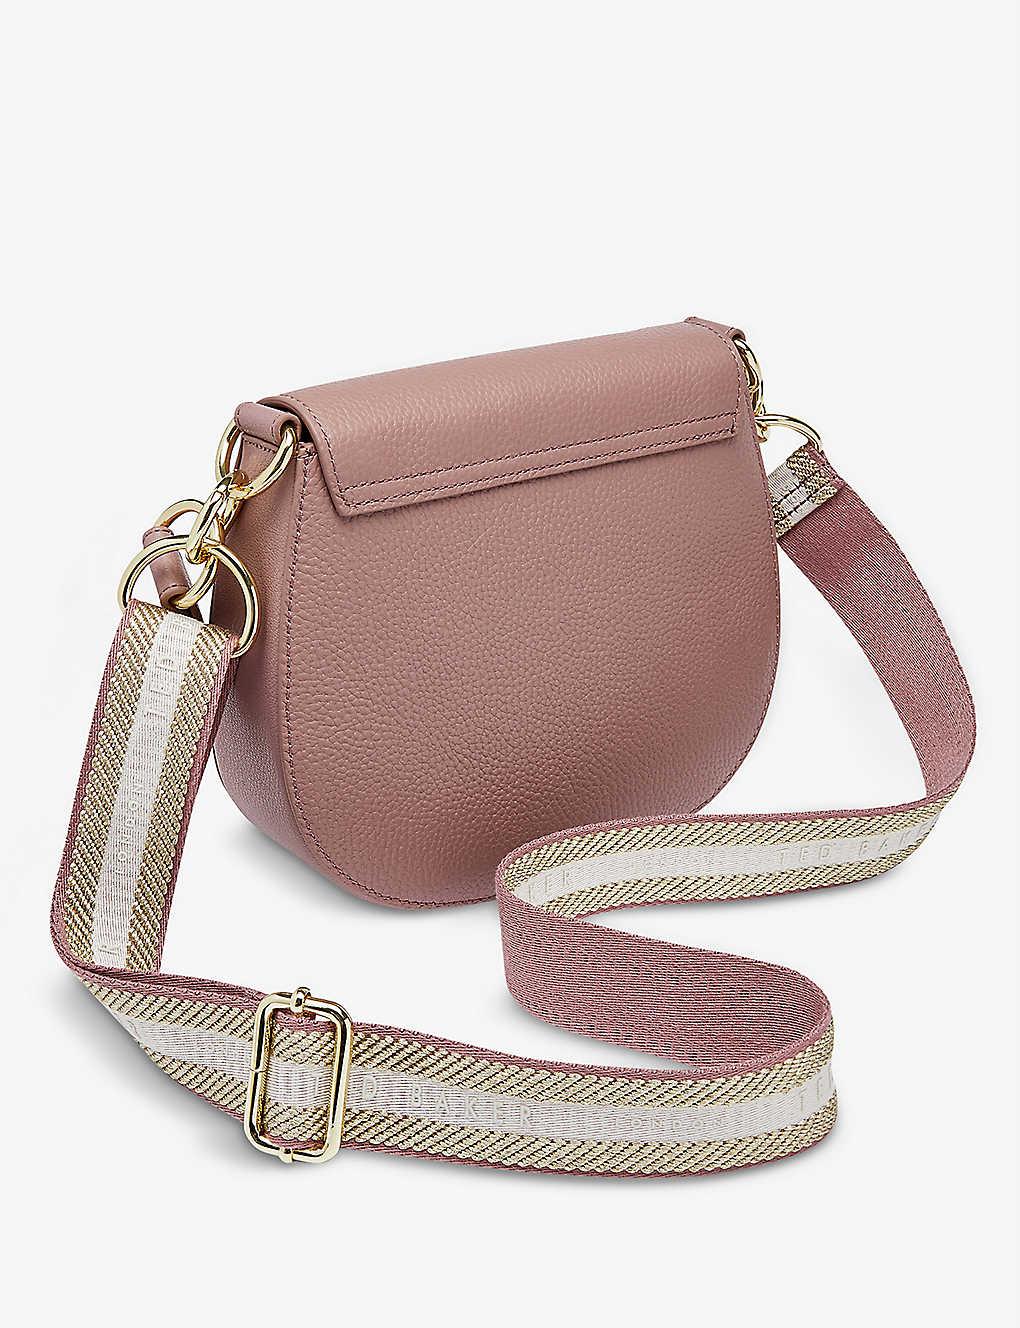 Ted Baker Leather Amail Crossbody Bag